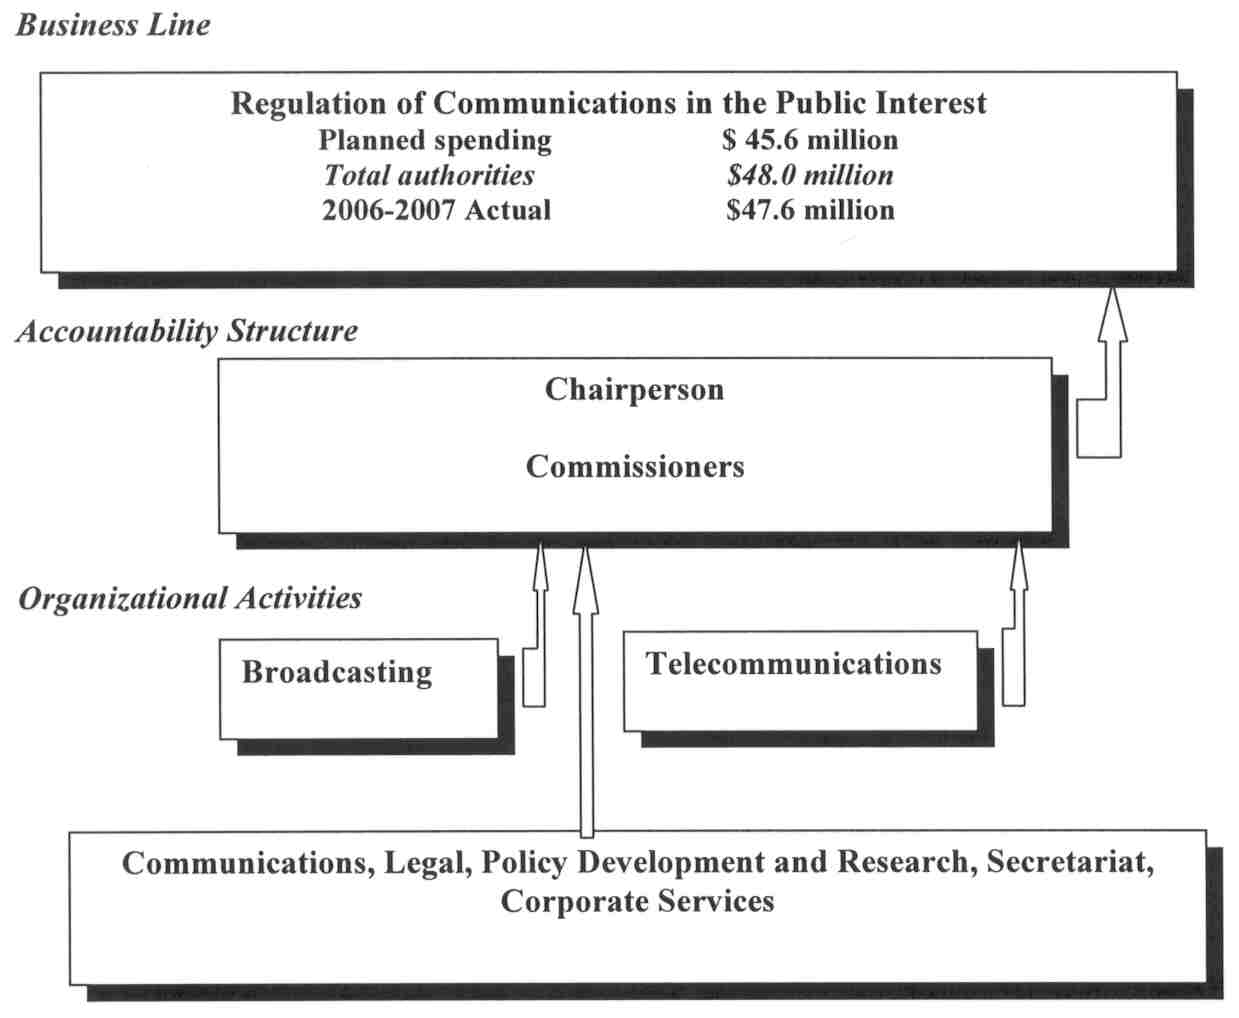 Business Line - Regulation of Communications in the Public Interest: Planned spending = $45.6 million, Total authorities = $48.0 million, 2006-2007 Actual = $47.6 million. Accountability Structure: Chairperson, Commissioners. Organizationa; Activities: Reporting to the Chairperson is Broadcasting, Telecommunications, Communications, Legal, Policy Development and Research, Secretariat, Corporate Services.